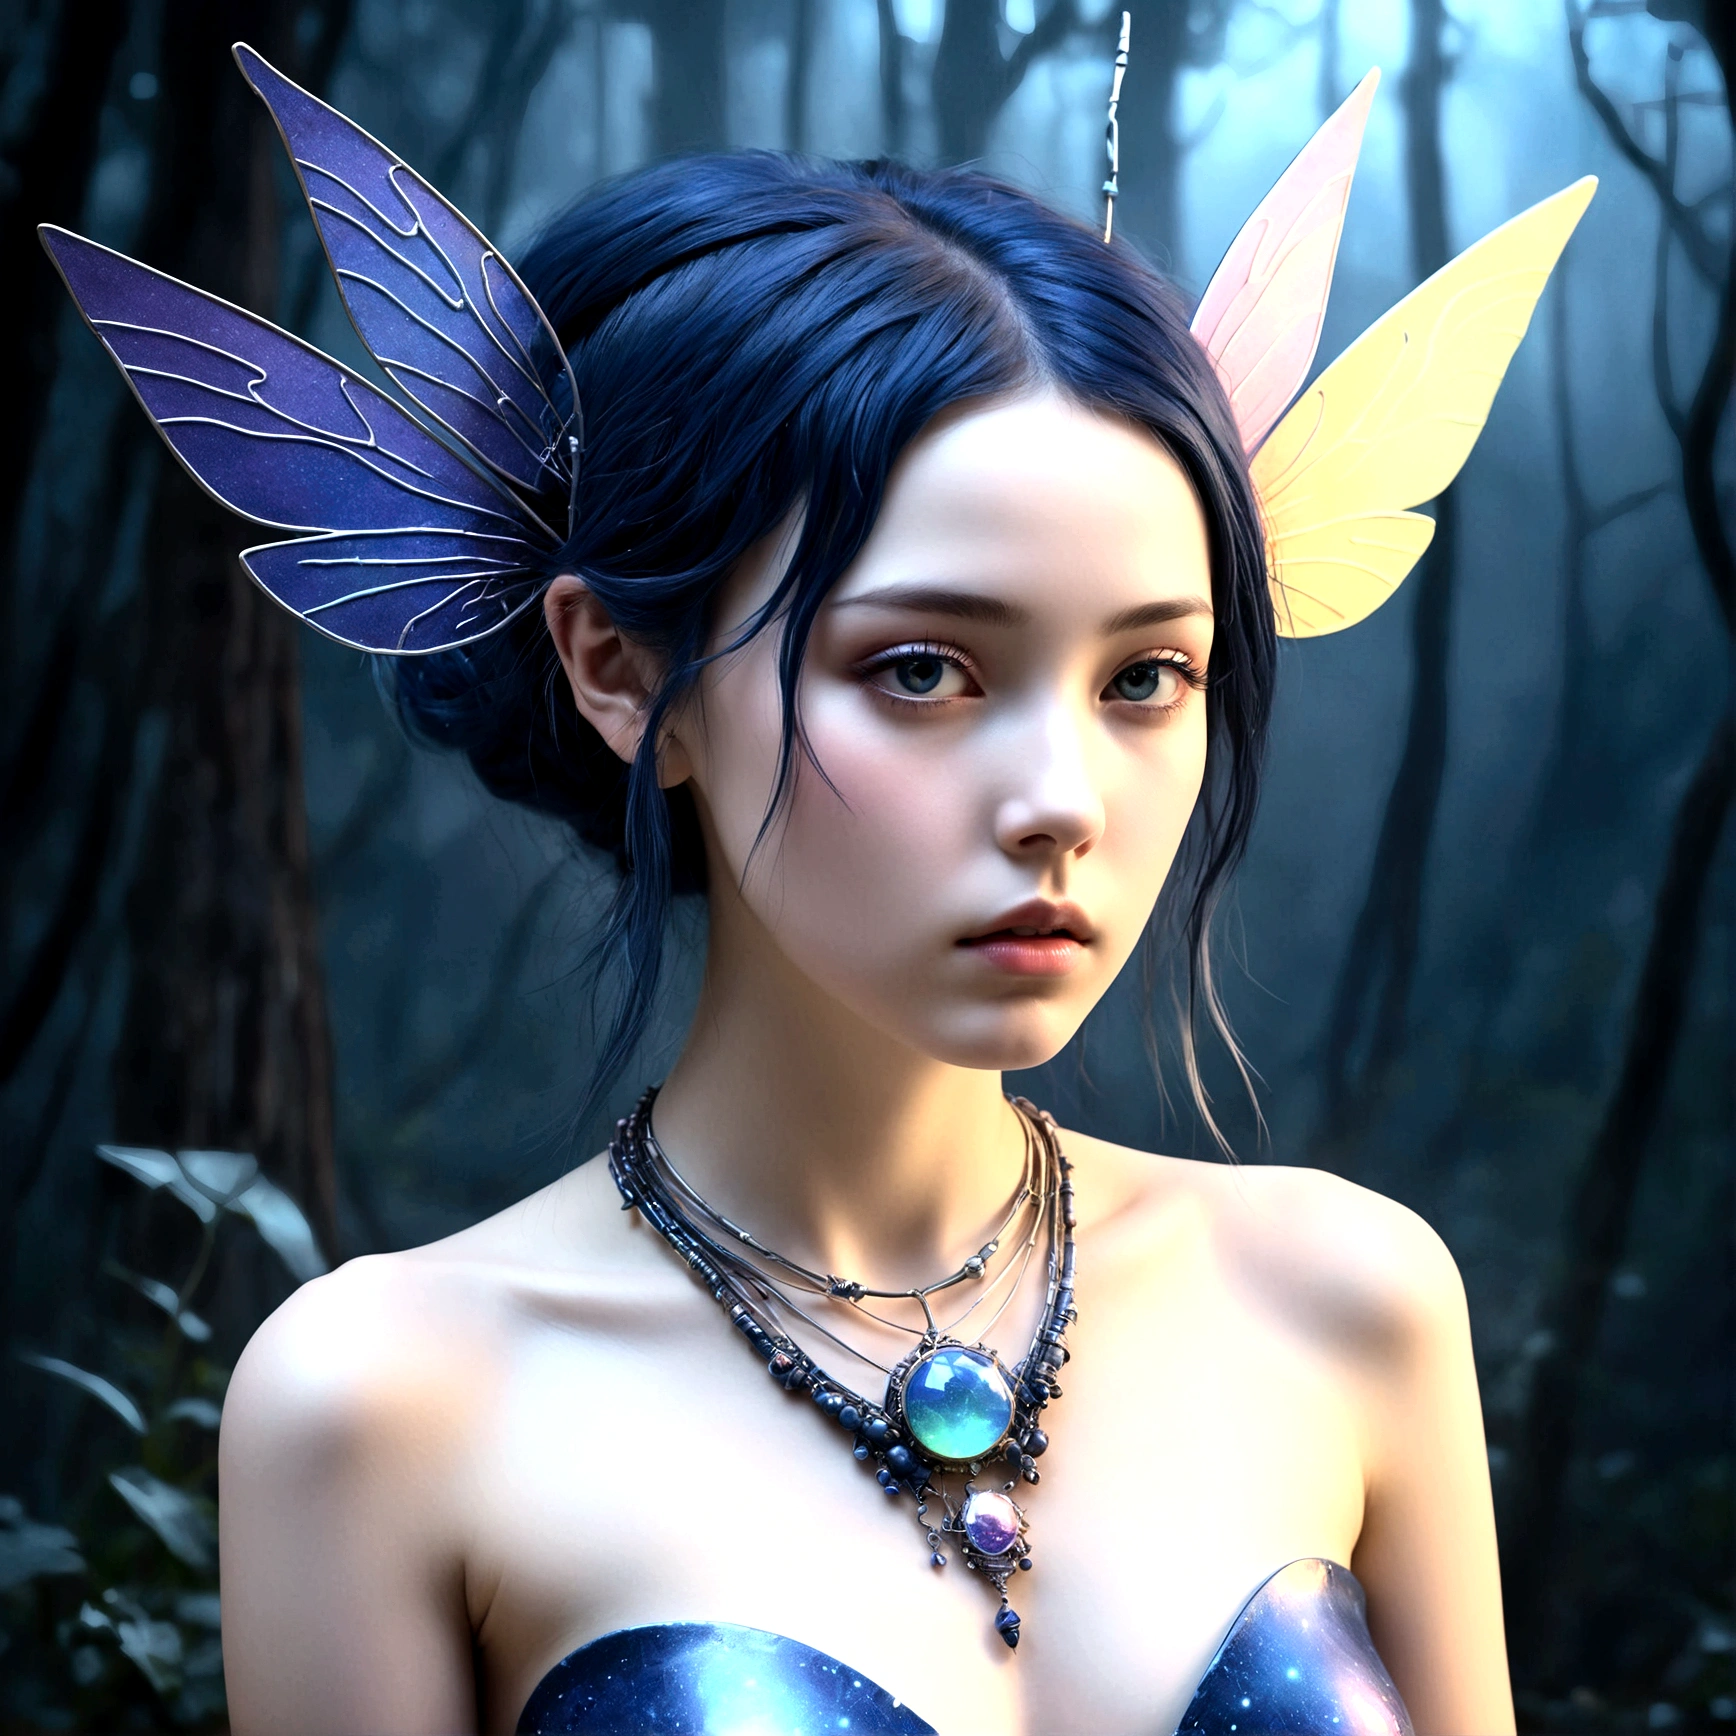 A fascinating digital painting captures the essence of mystical fairies, with porcelain skin and strong spots, which form a striking contrast. Breathtaking 3D playback, I have space in my head, thin, bright multi-colored dots, minimalist drawing, expressive rainbow RGB colors, A masterpiece of digital art, Nice, colourful, surreal, Gloomy fantasy,  conceptual art, Ukiyo-e create a post-apocalyptic, futuristic atmosphere, which contrasts with the dreamy atmosphere of the scene. The fascinating details and the captivating composition take the viewer into a mystical world,. The harmony of the twilight and midnight blue tones in the background creates a magical and enchanting aura. Wire structures and disco-core fashion elements evoke a post-apocalyptic, futuristic atmosphere hervor, while the creature’s hyper-realistic details draw the viewer into its captivating, mystical world.